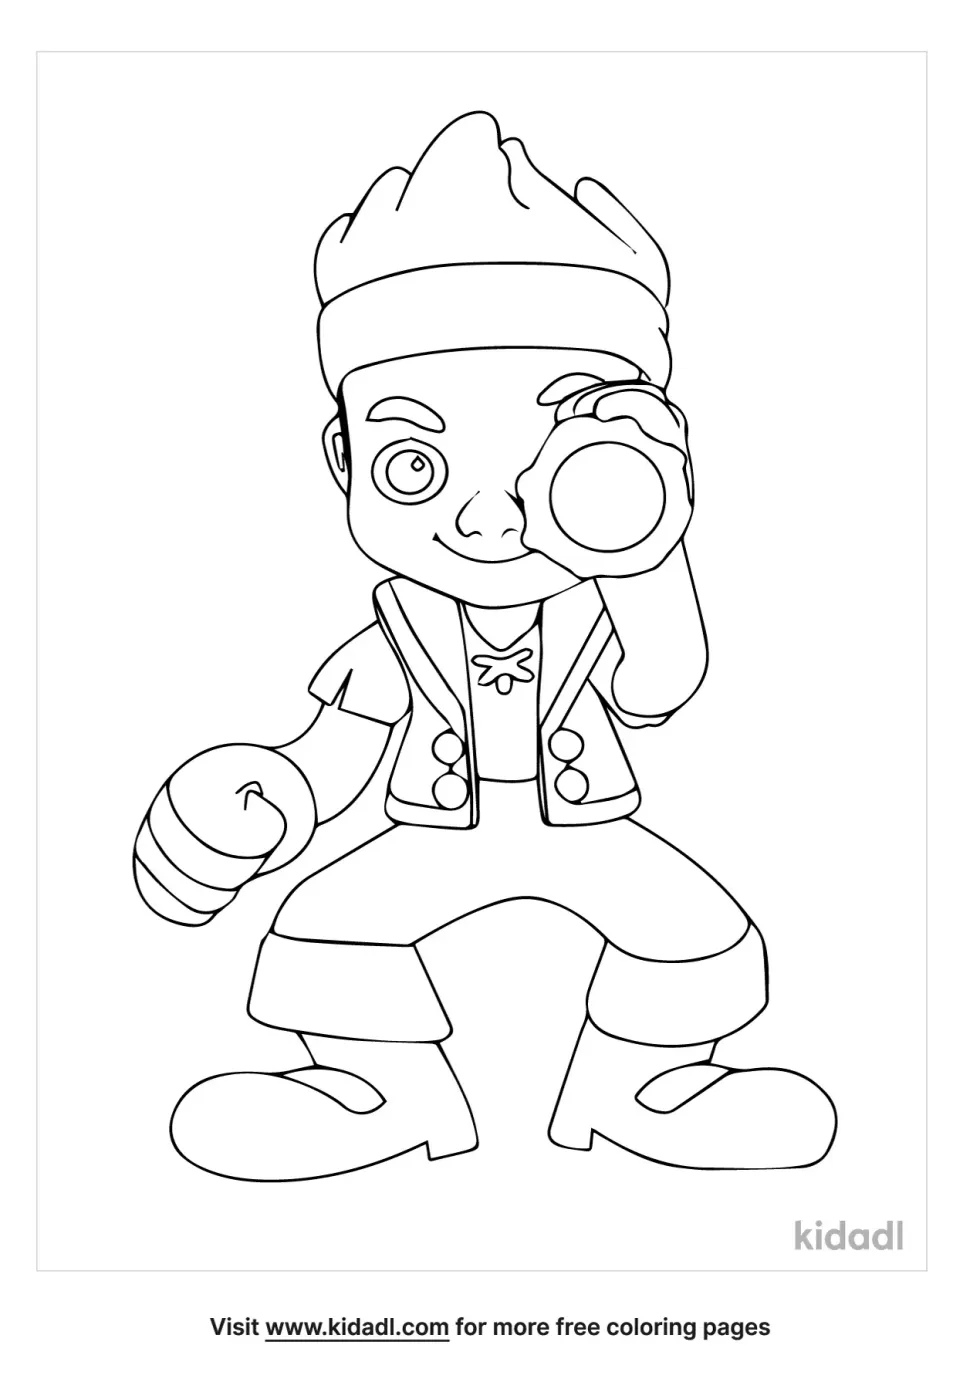 Cute Pirate Coloring Page